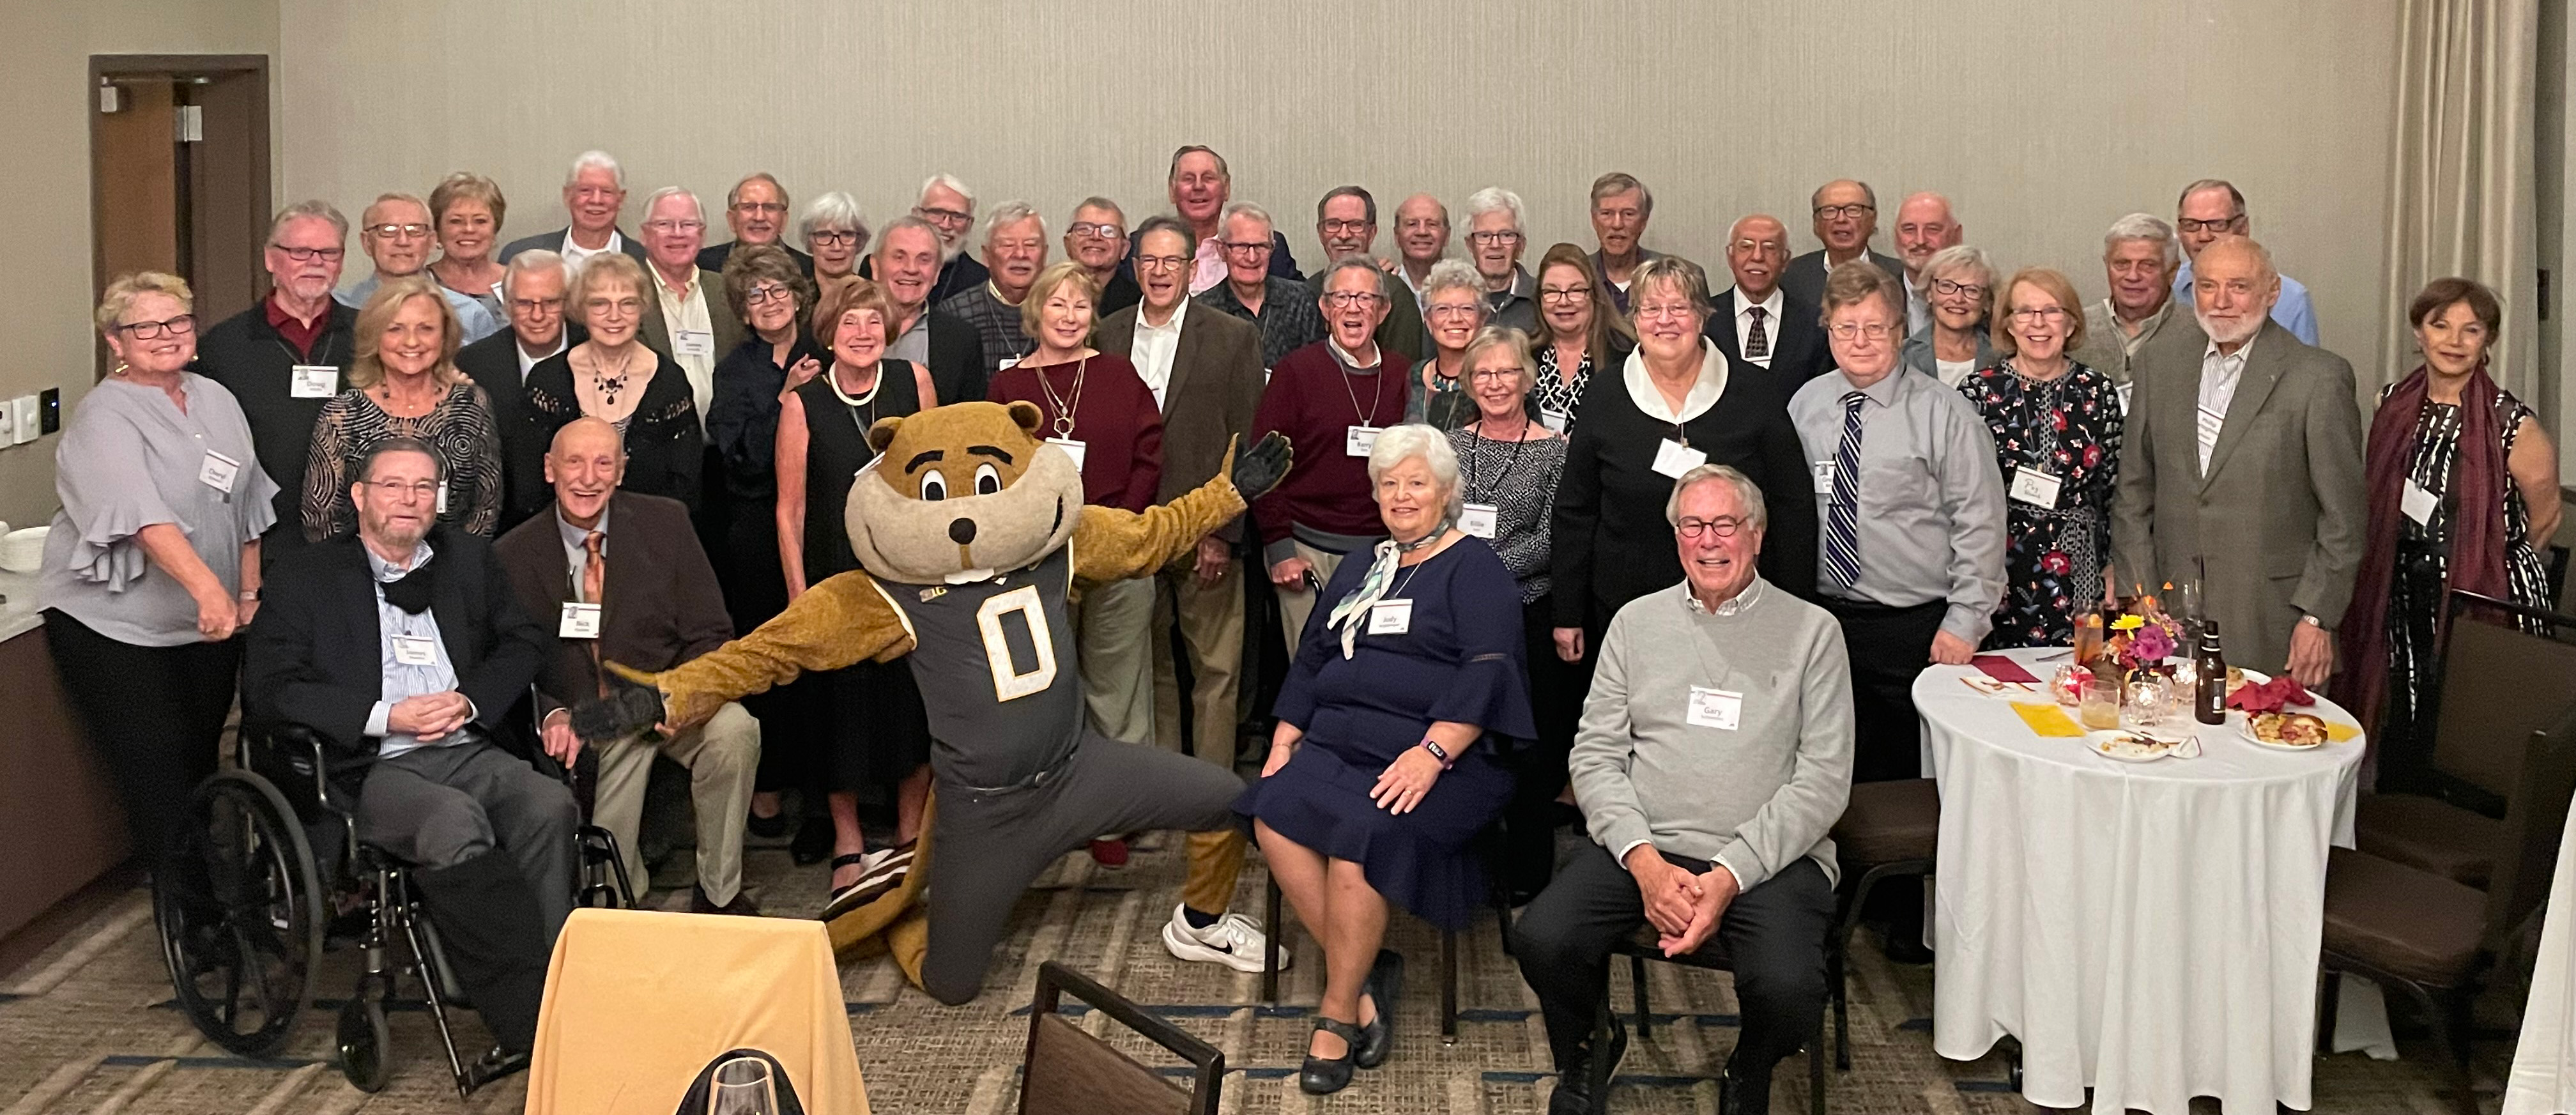 Class of 19721 group photo with Goldy